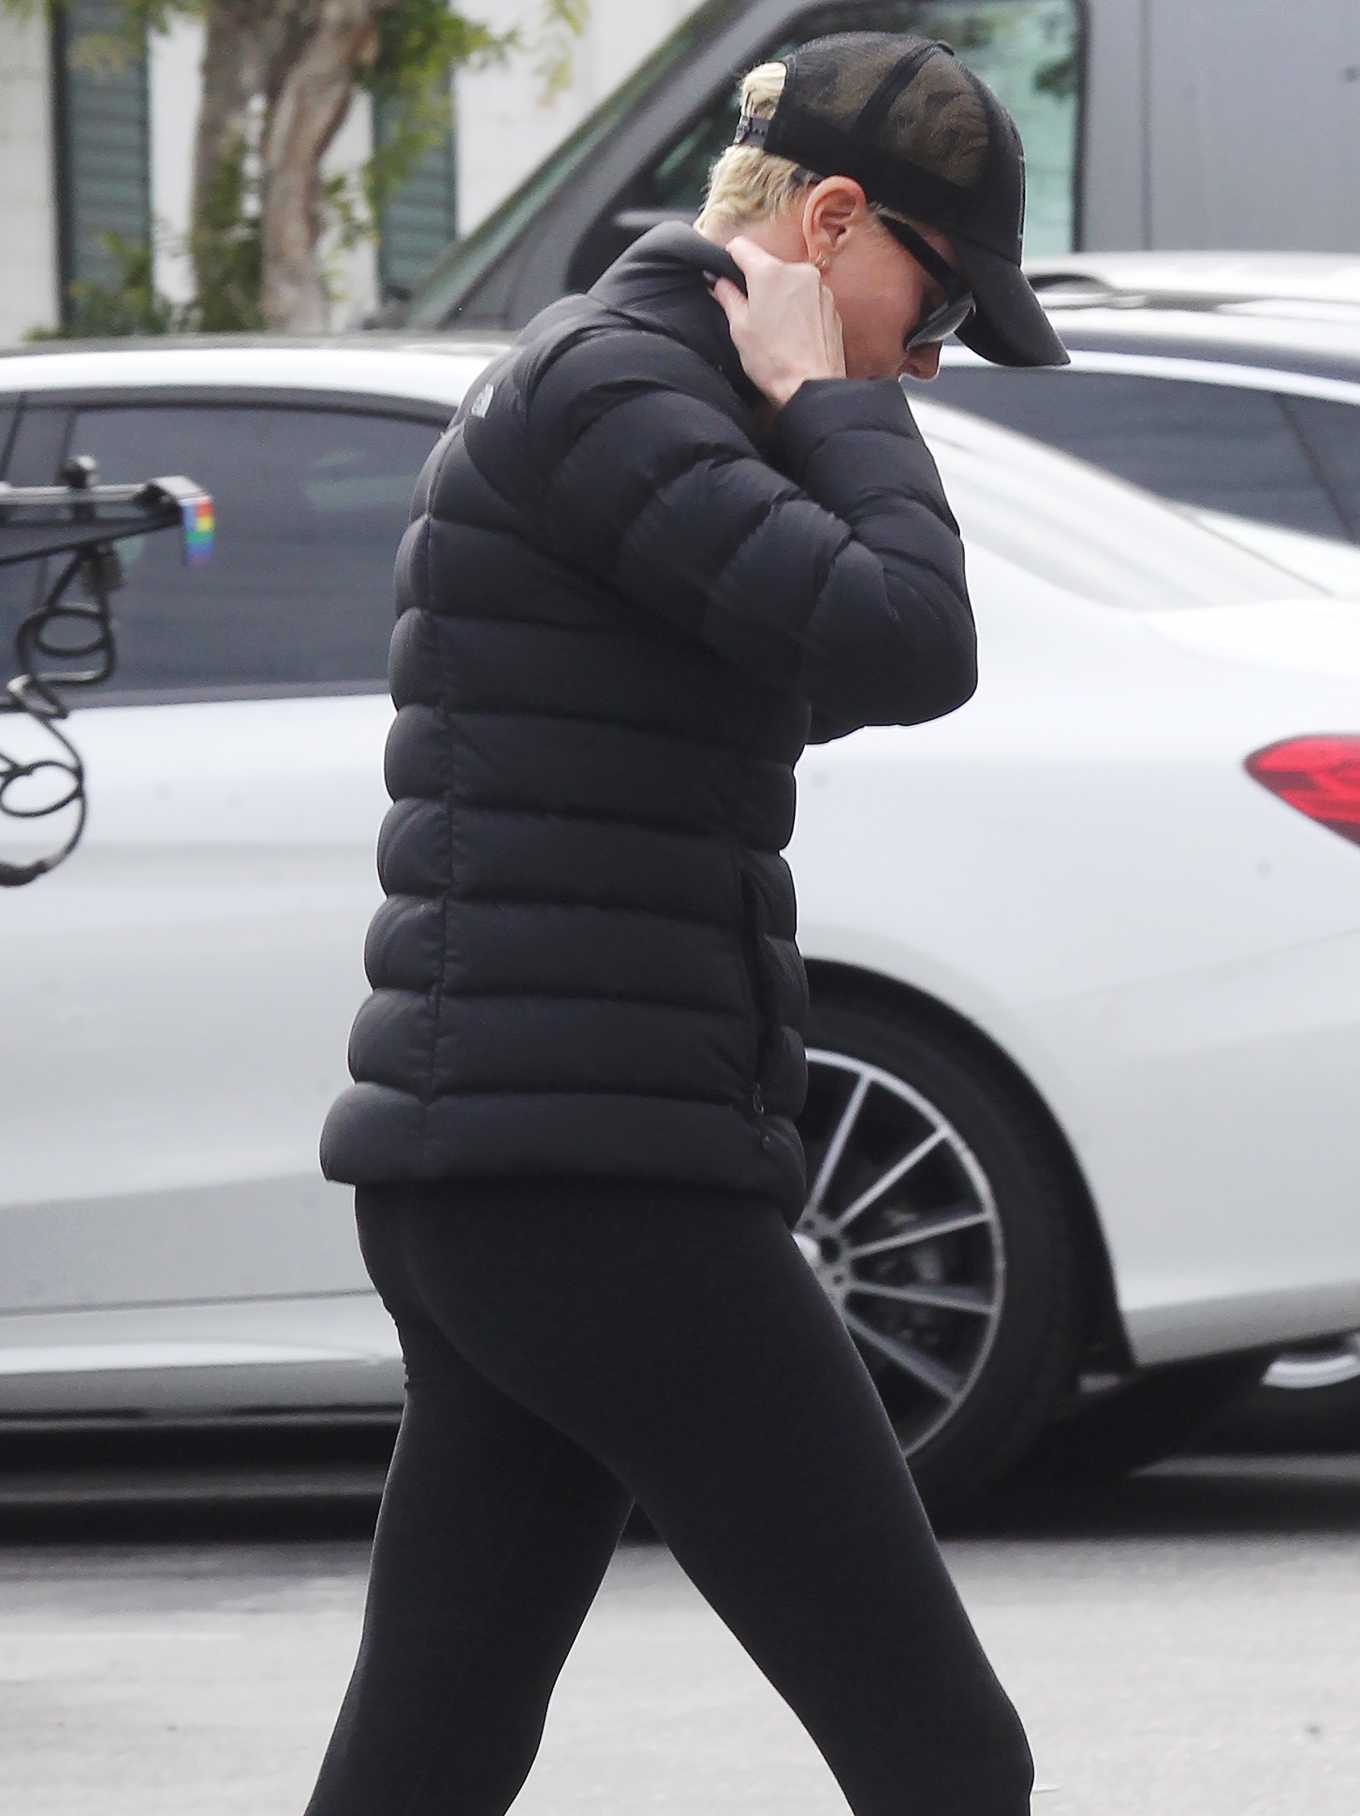 Charlize Theron â€“ Spopping canddis in Beverly Hills